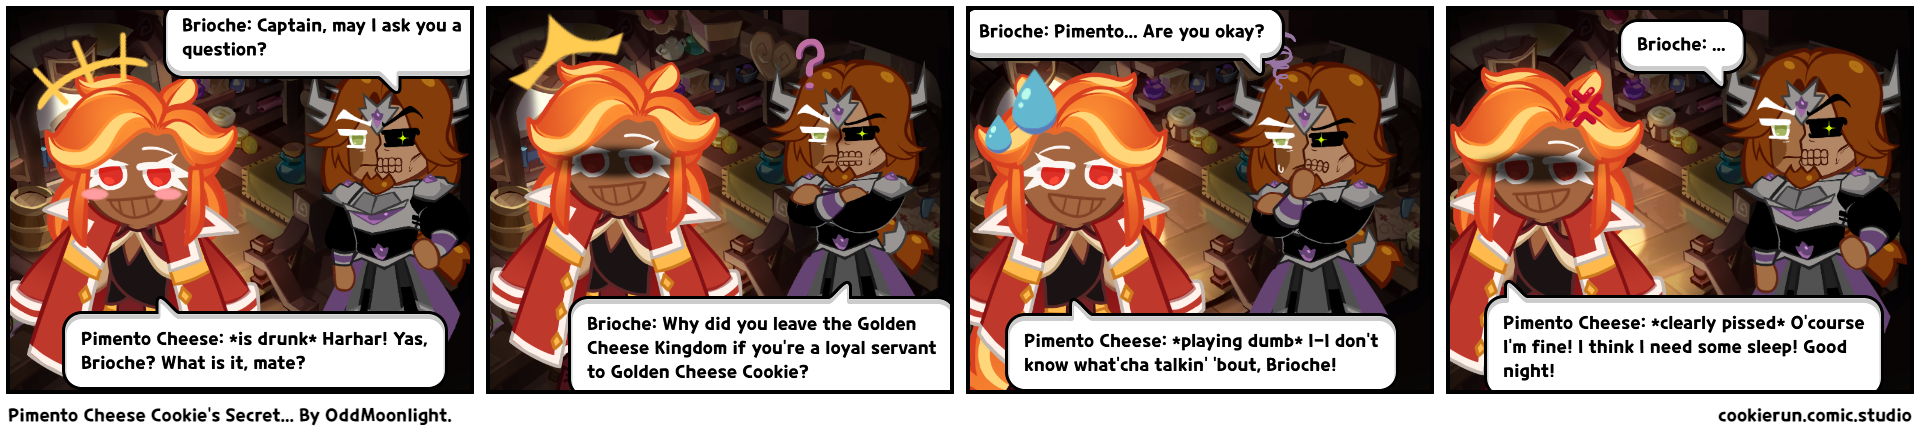 Pimento Cheese Cookie's Secret... By OddMoonlight.